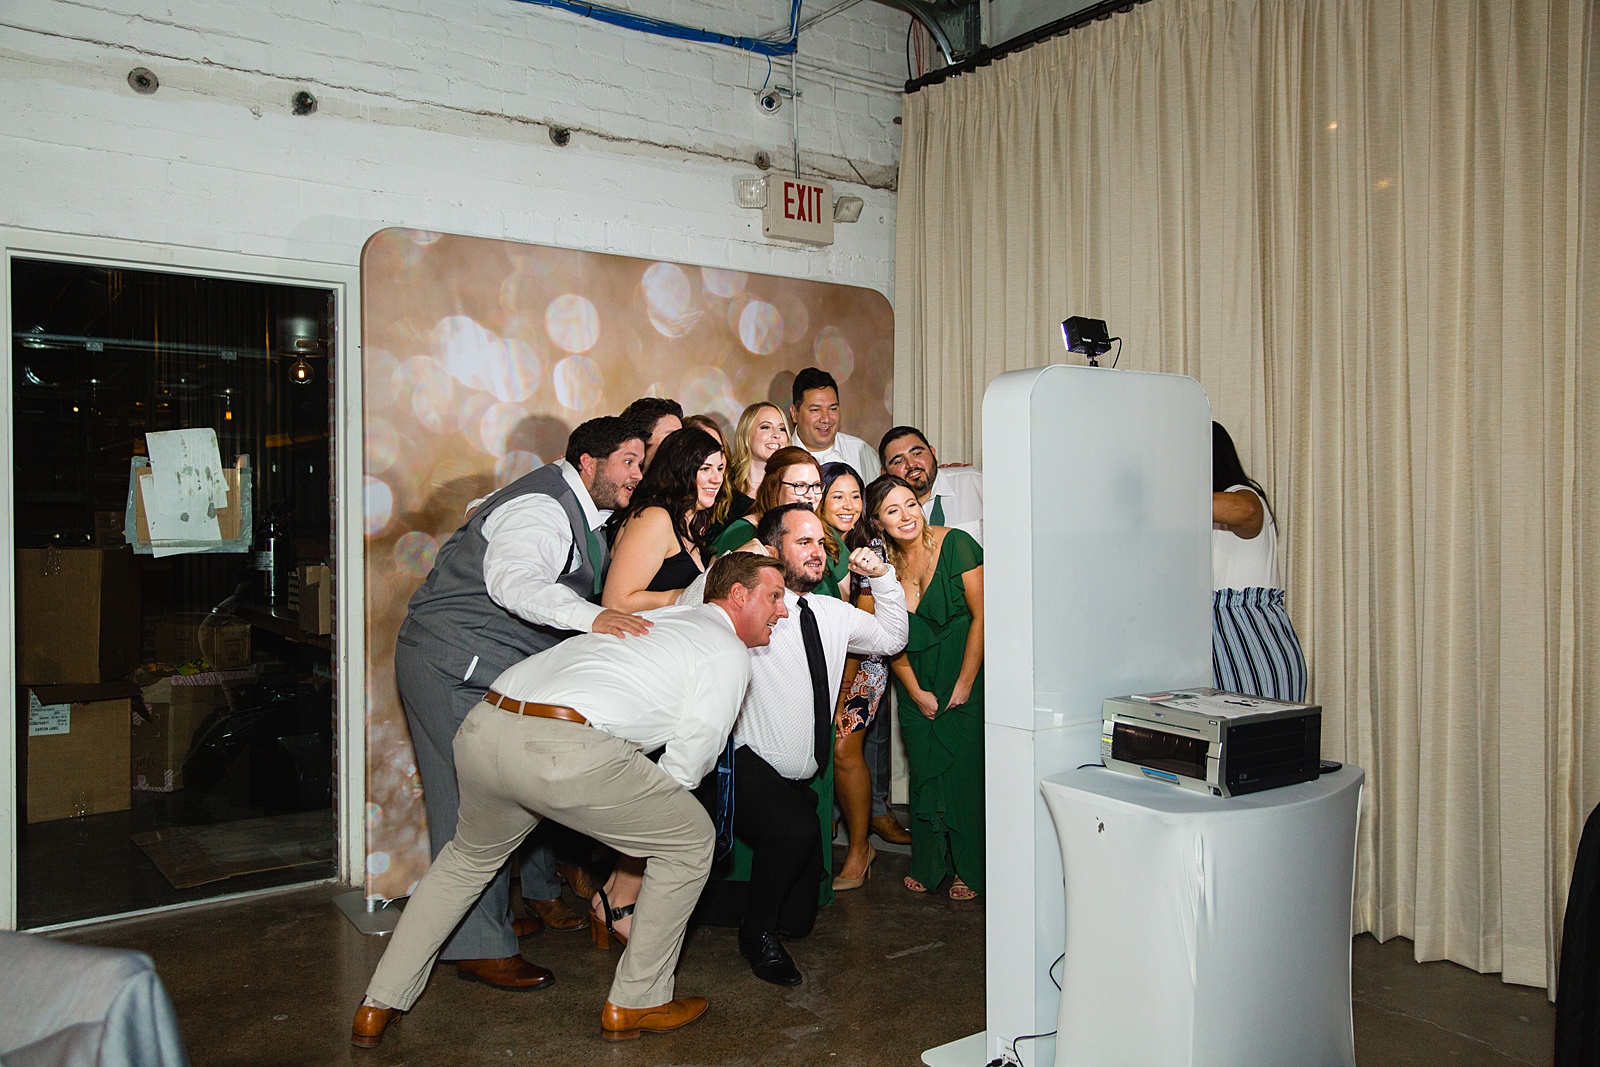 Guests pose together in a photo booth by Phoenix wedding photographer PMA Photography.